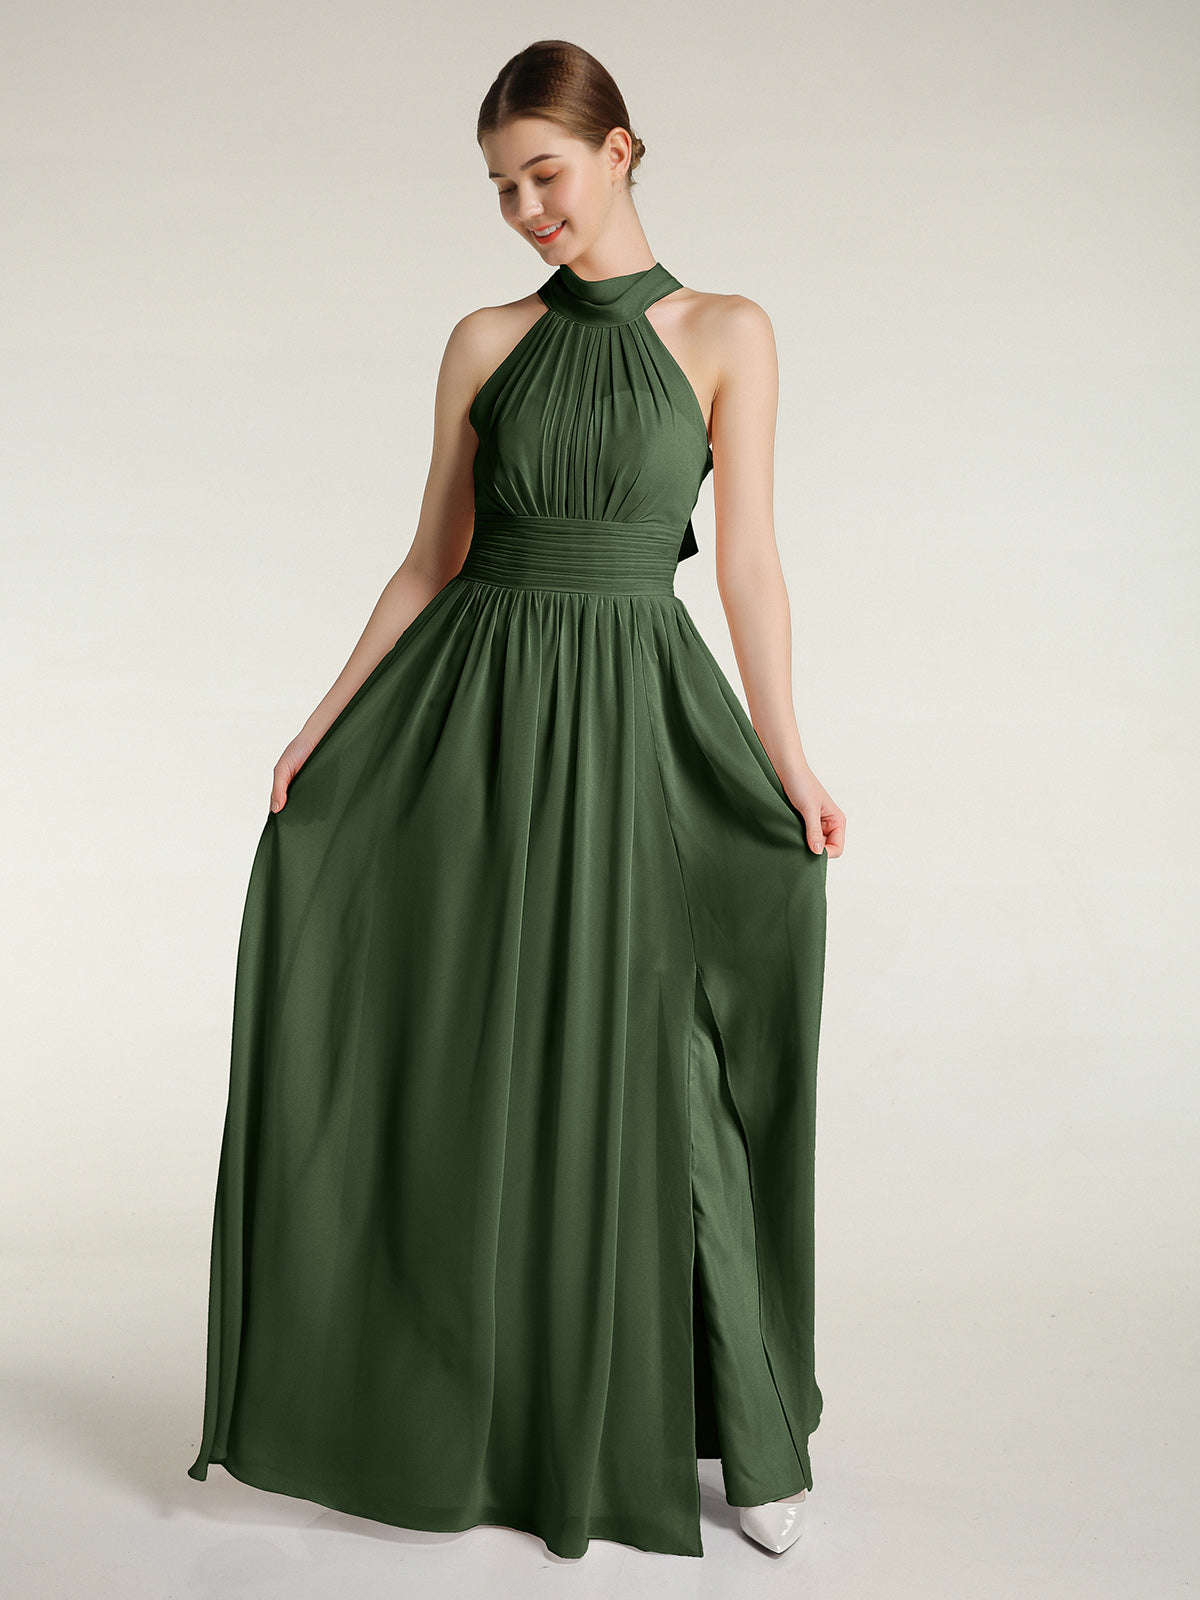 Yvette Gown - Olive